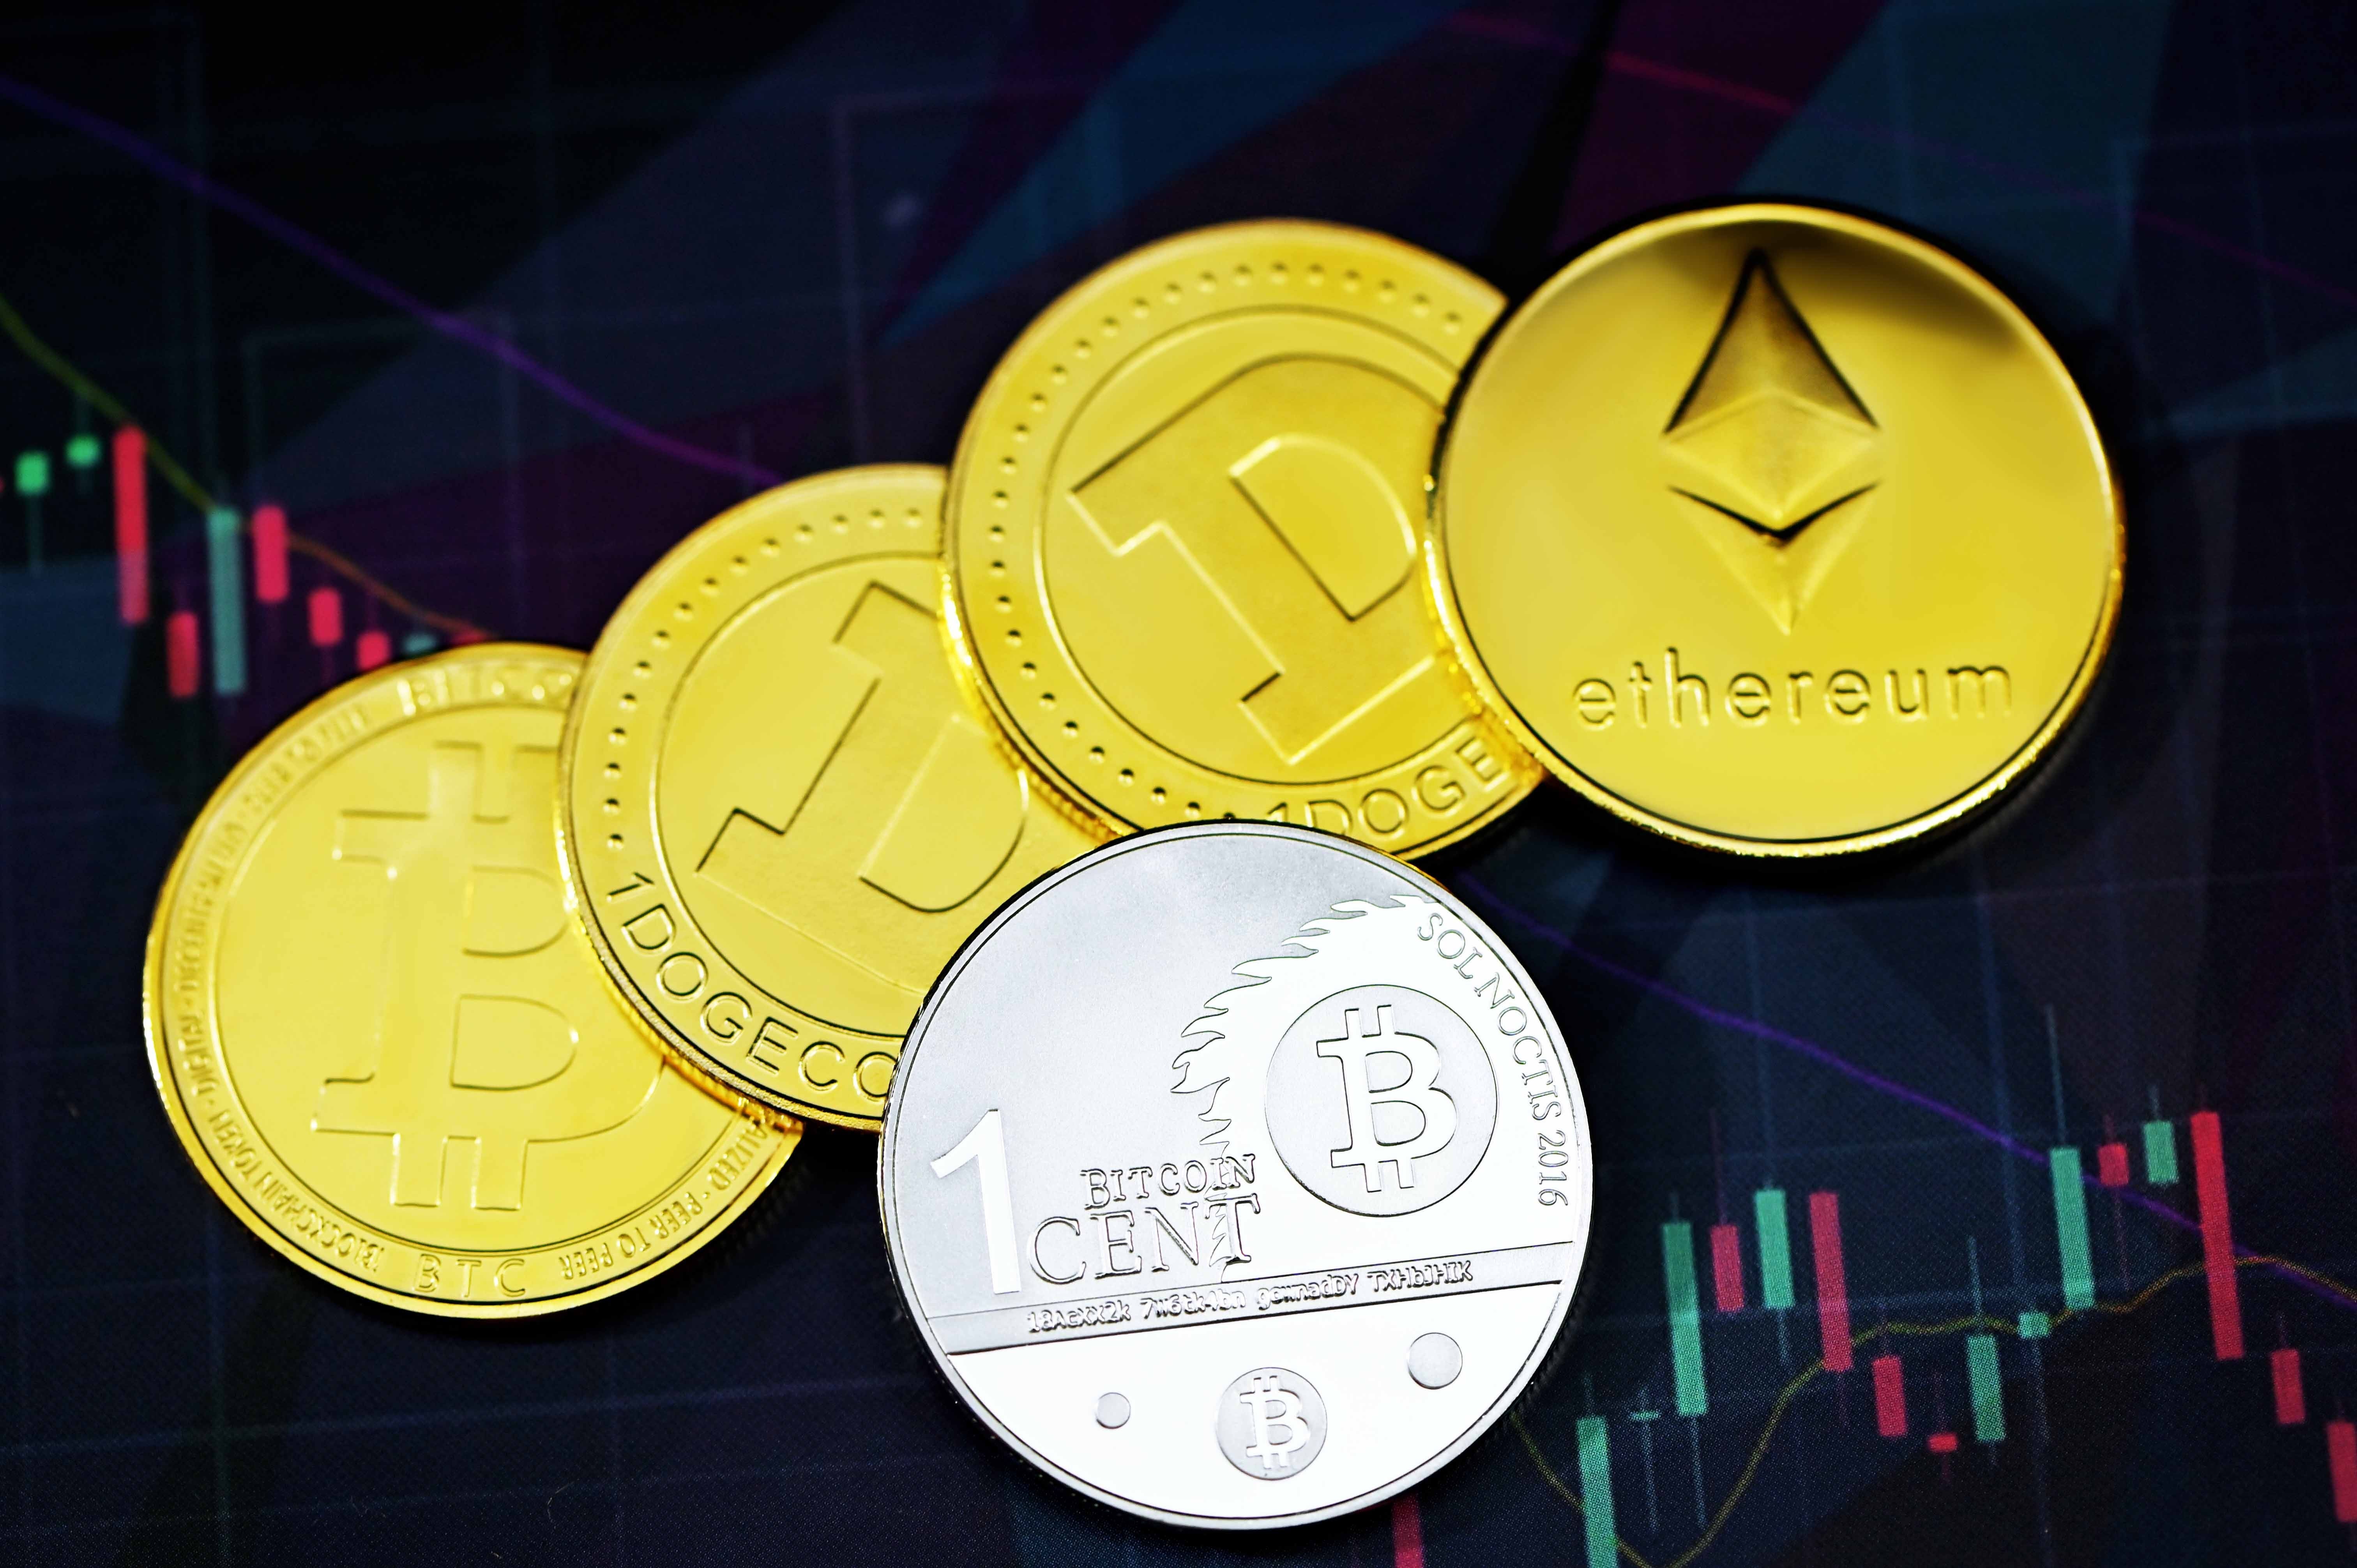 Bitcoin Recovers Lost Momentum, Dogecoin Moves Up, But The 'Real Altcoin Party' Begins When Ethereum Breaks Over $4,000